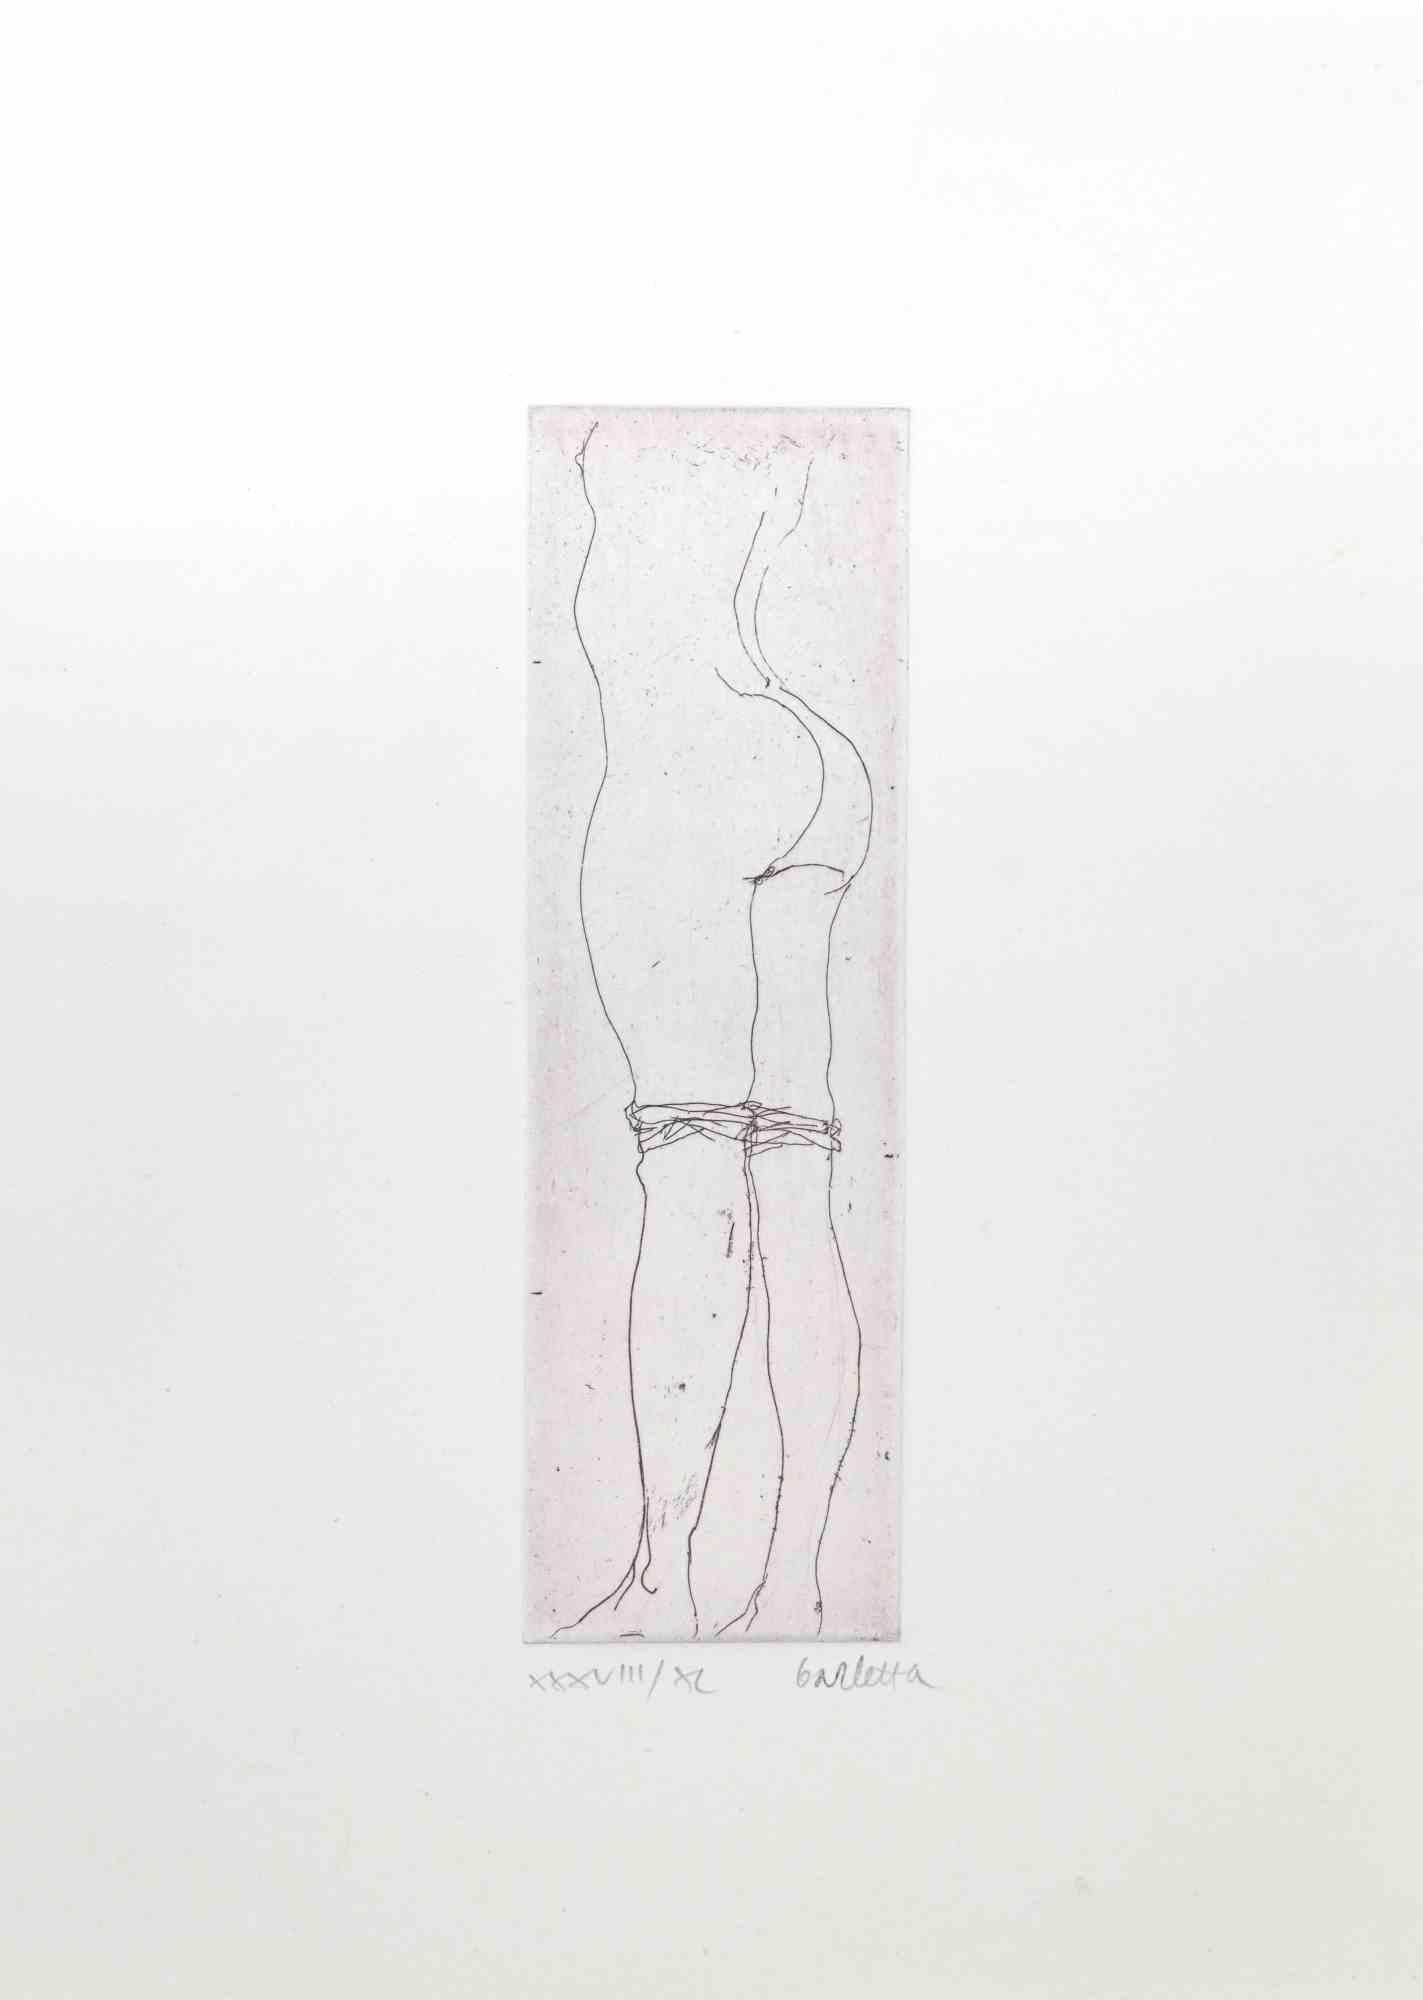 Nude is a etching on cardboard realized by Sergio Barletta in 1974. 

sheet dimensions, 25 x 17 cm.

Handsigned in pencil in the lower right margin.

Edition XXXVIII/XL 

Very good condition.

 

 